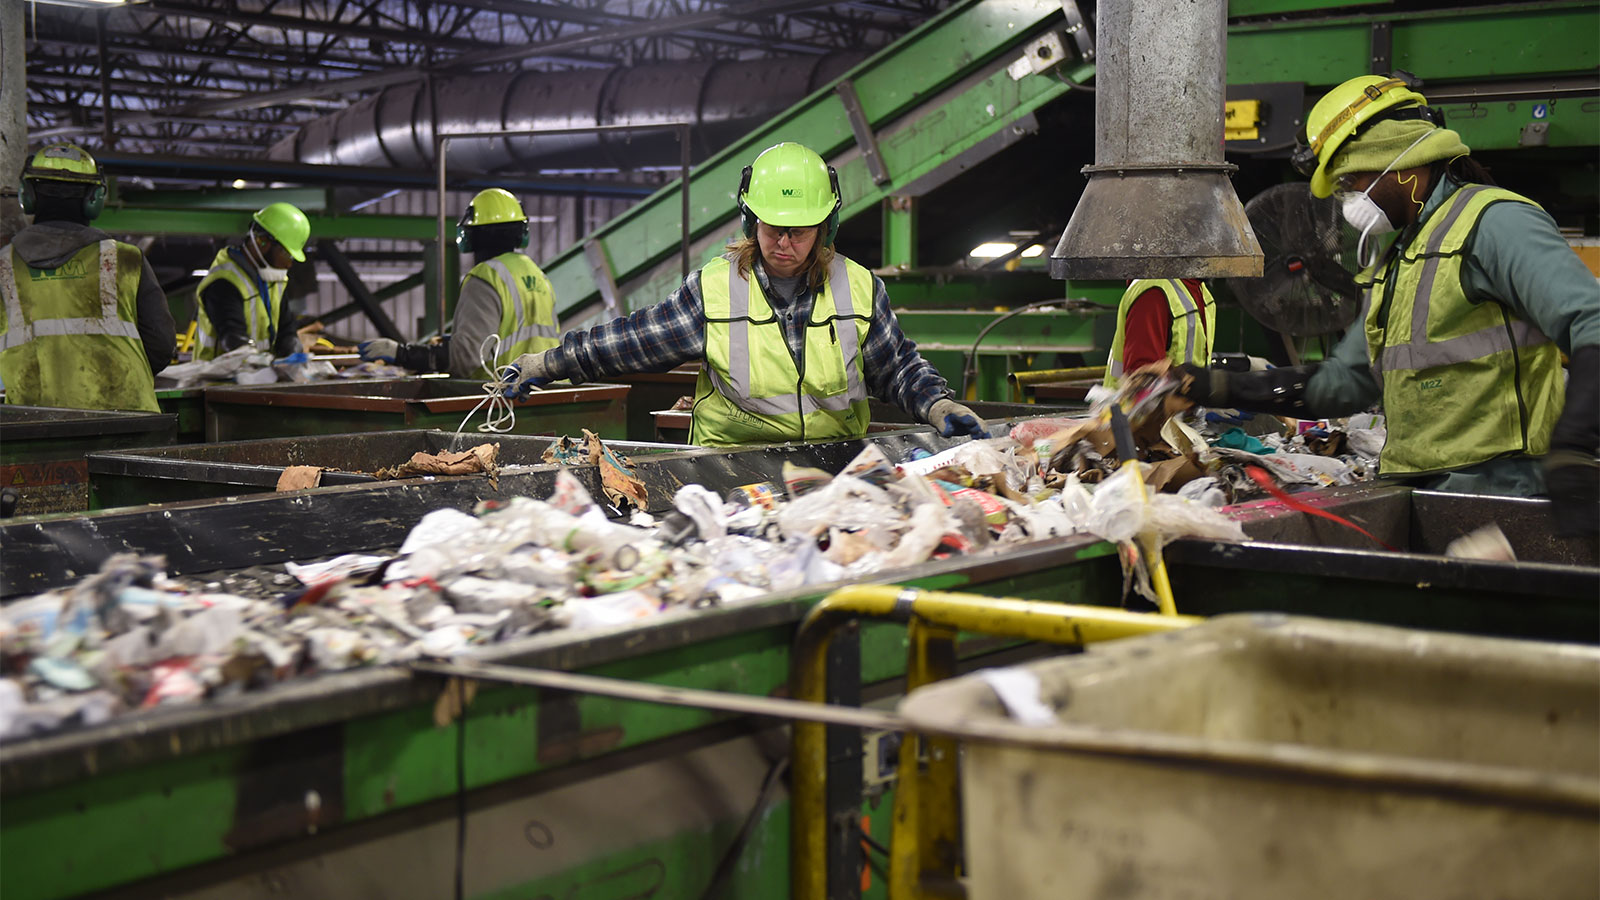 People working in waste management facility sorting through trash